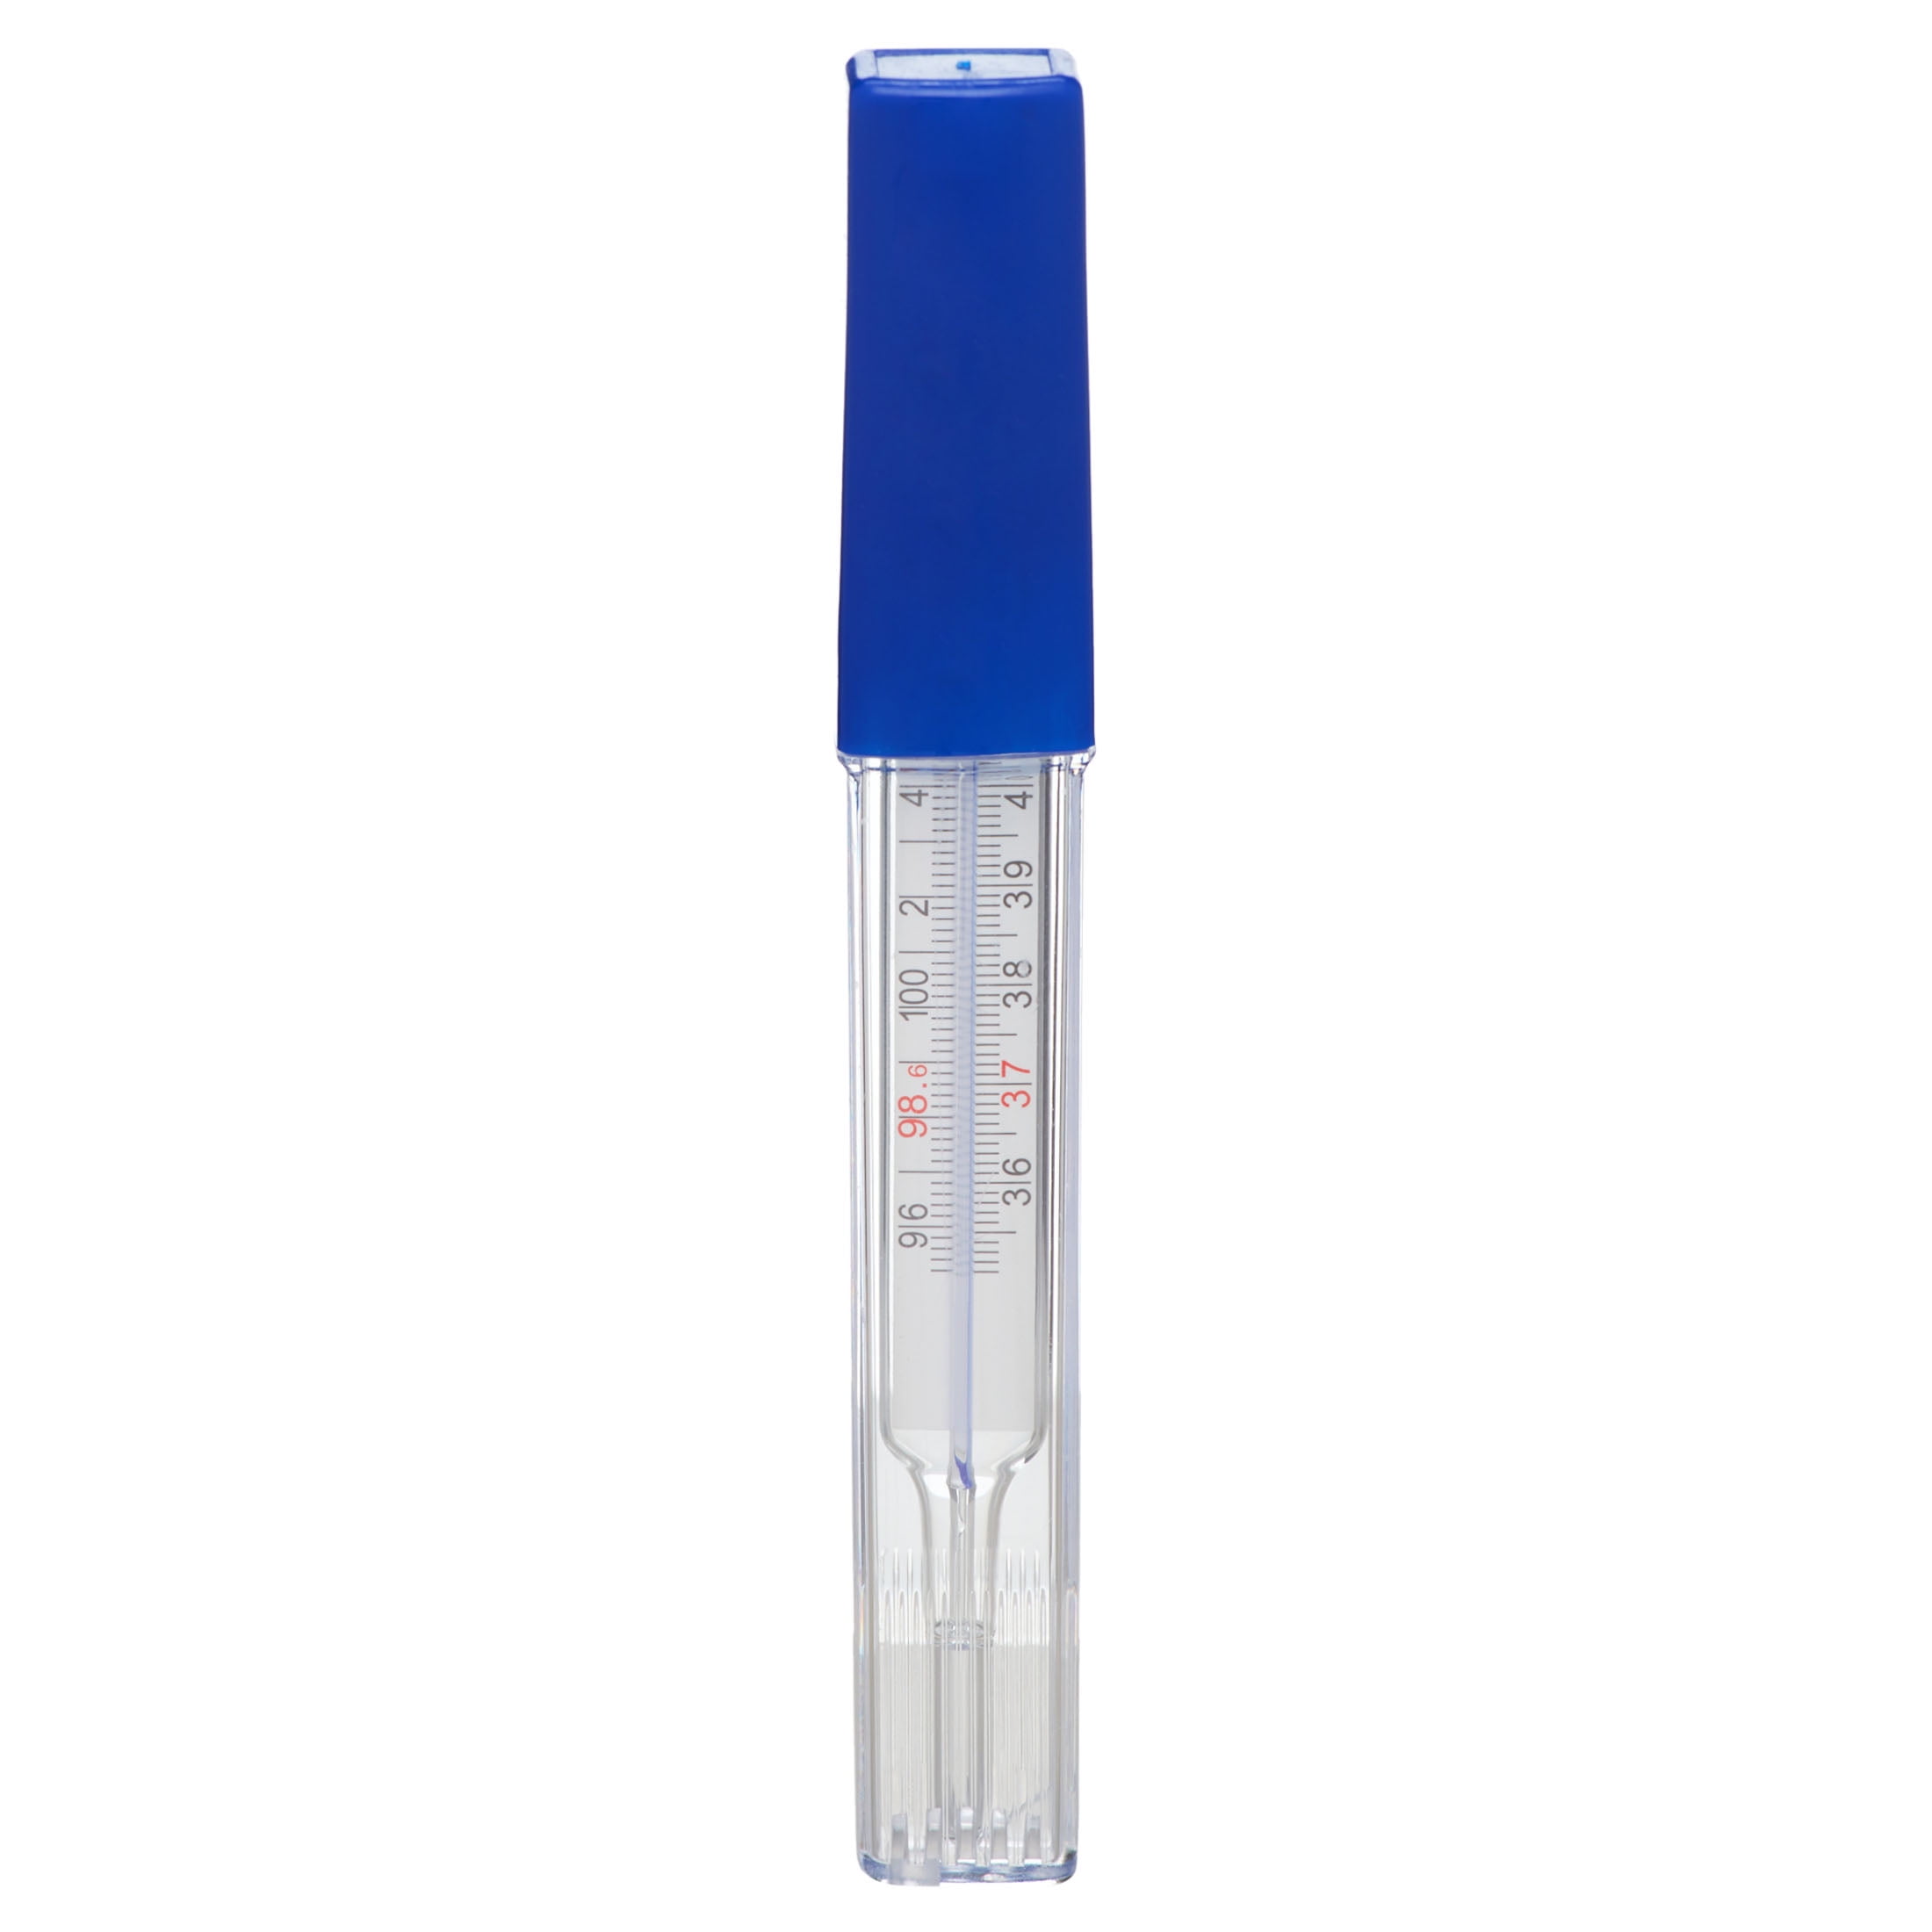 Equate Mercury-Free 3-Minute Glass Thermometer